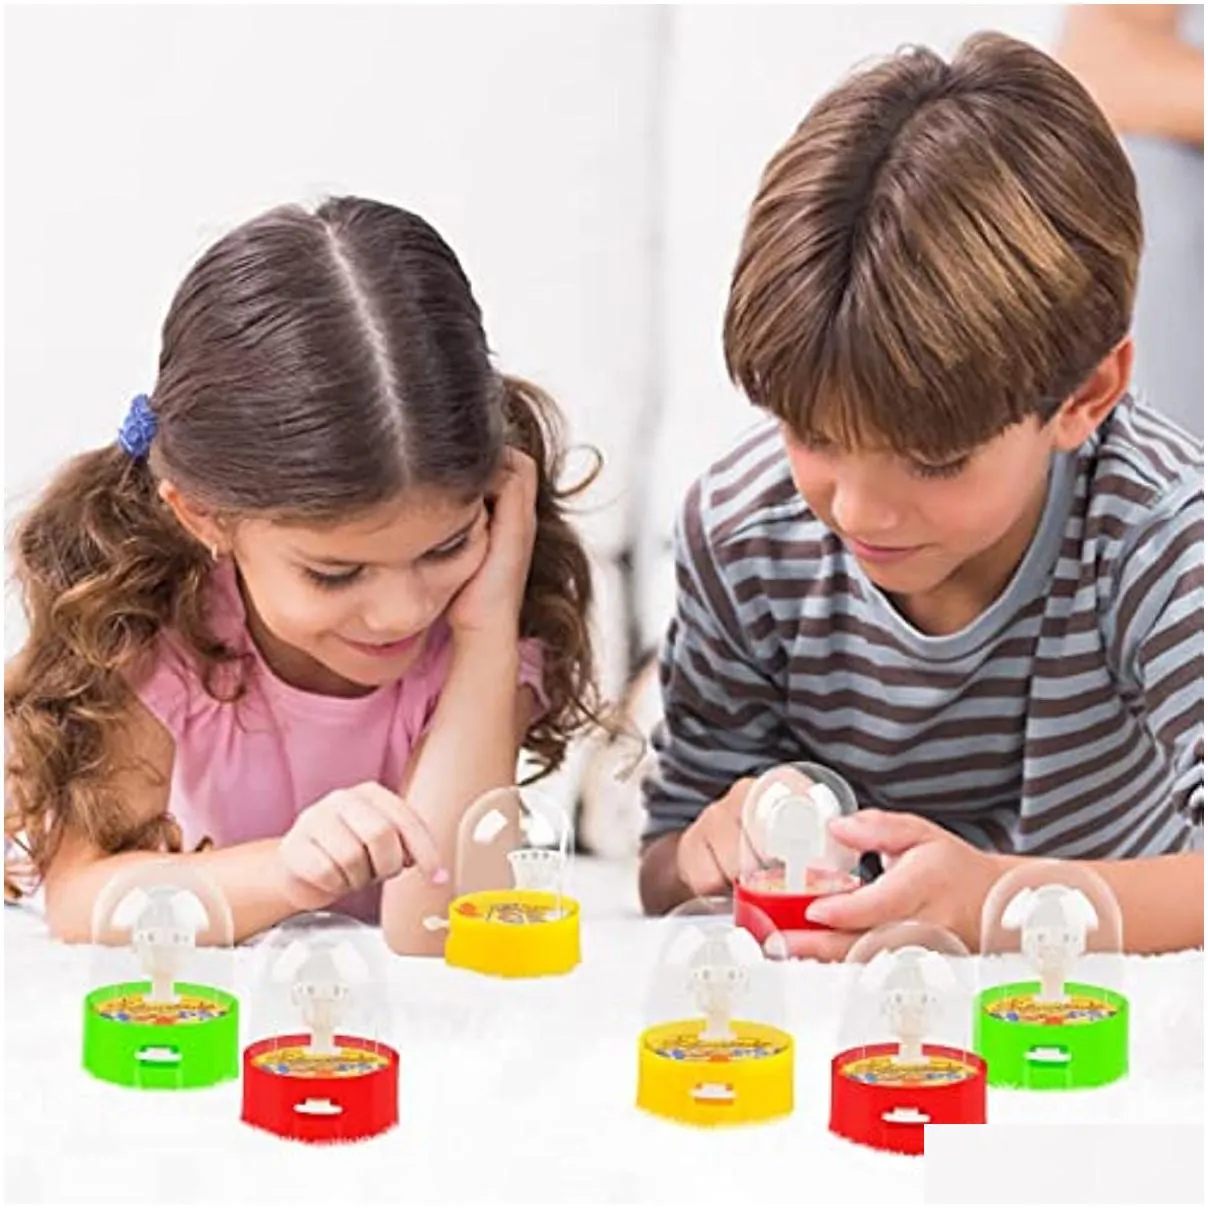 Finger Toys Mini Finger Basketball Shooting Games Toy Party Favors Handheld Desktop Toys For Kids Toddlers Birthday Supplies Decoratio Dhhj2